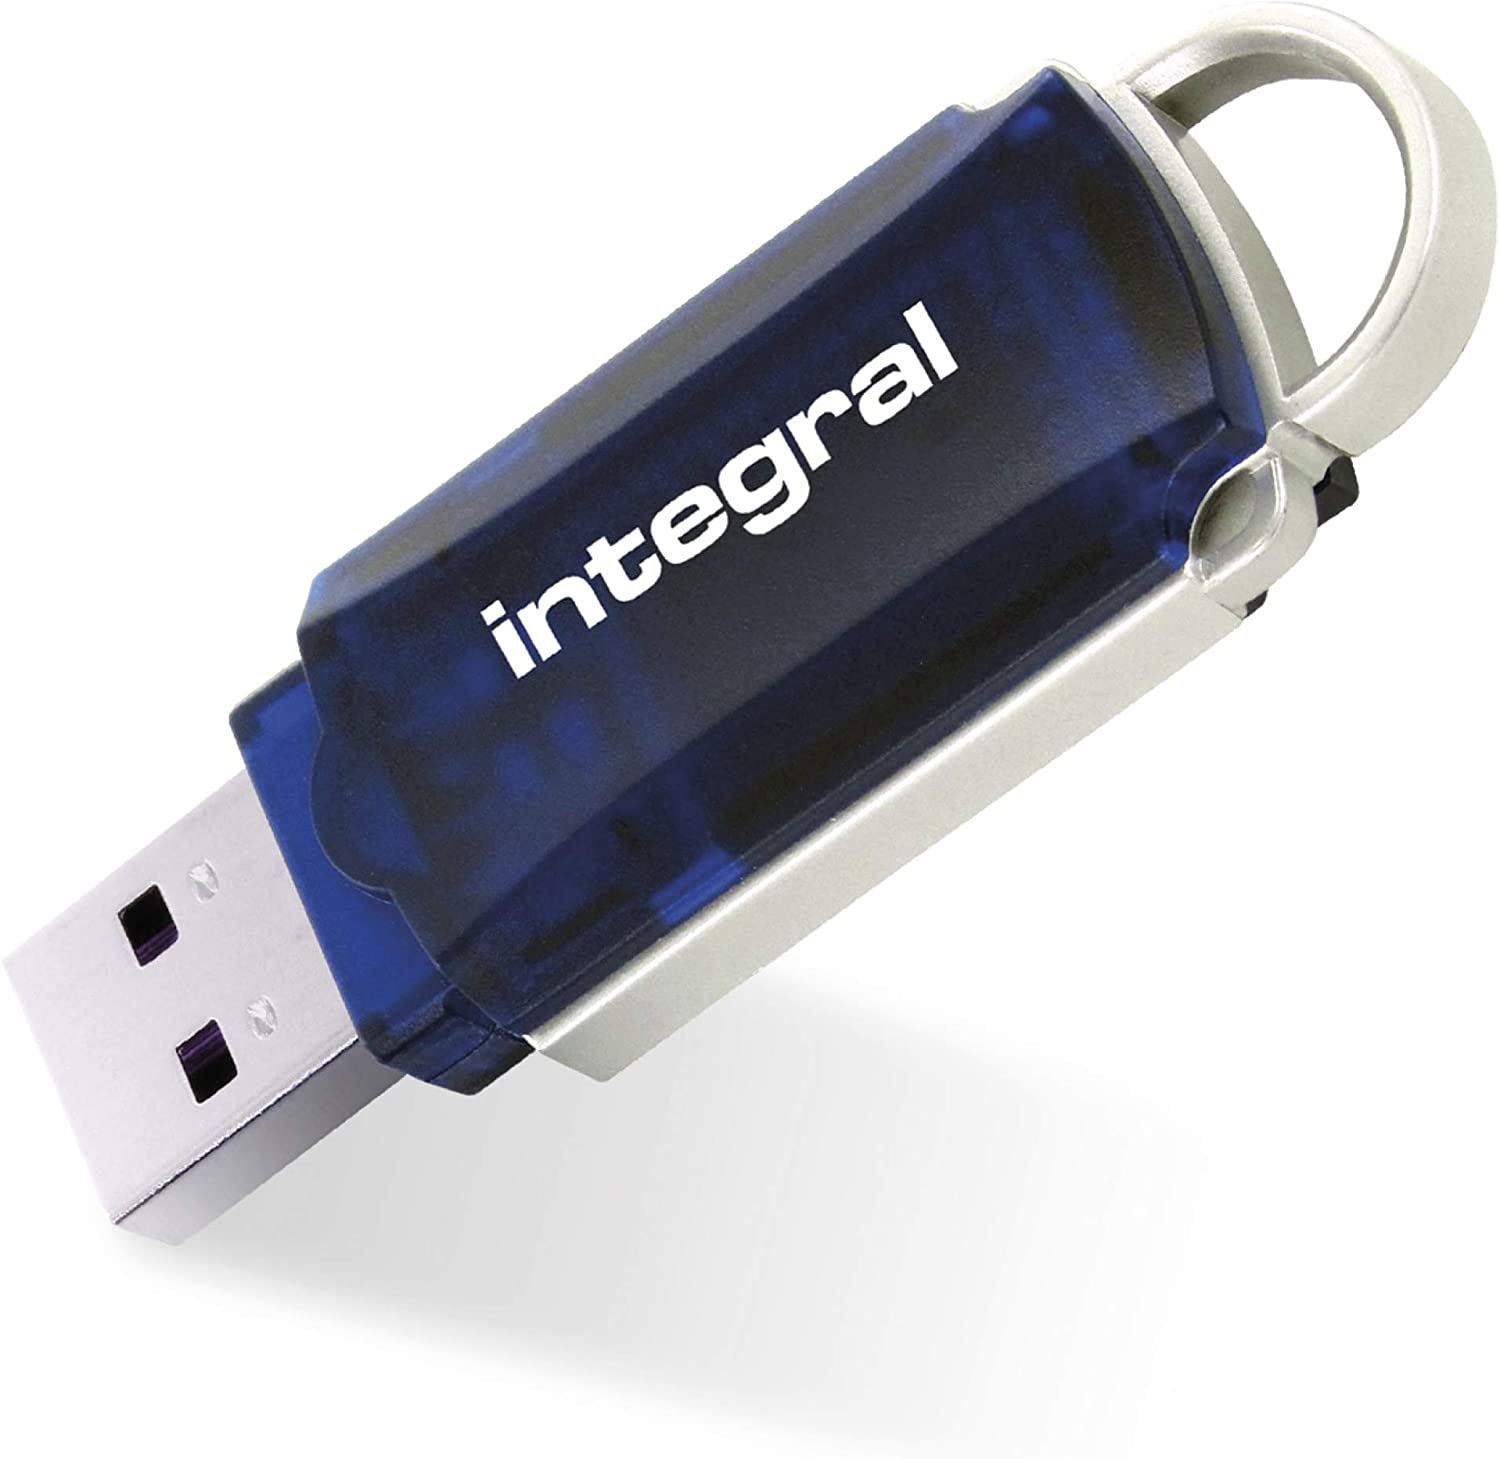 16GB Integral Courier - USB Flash Drive